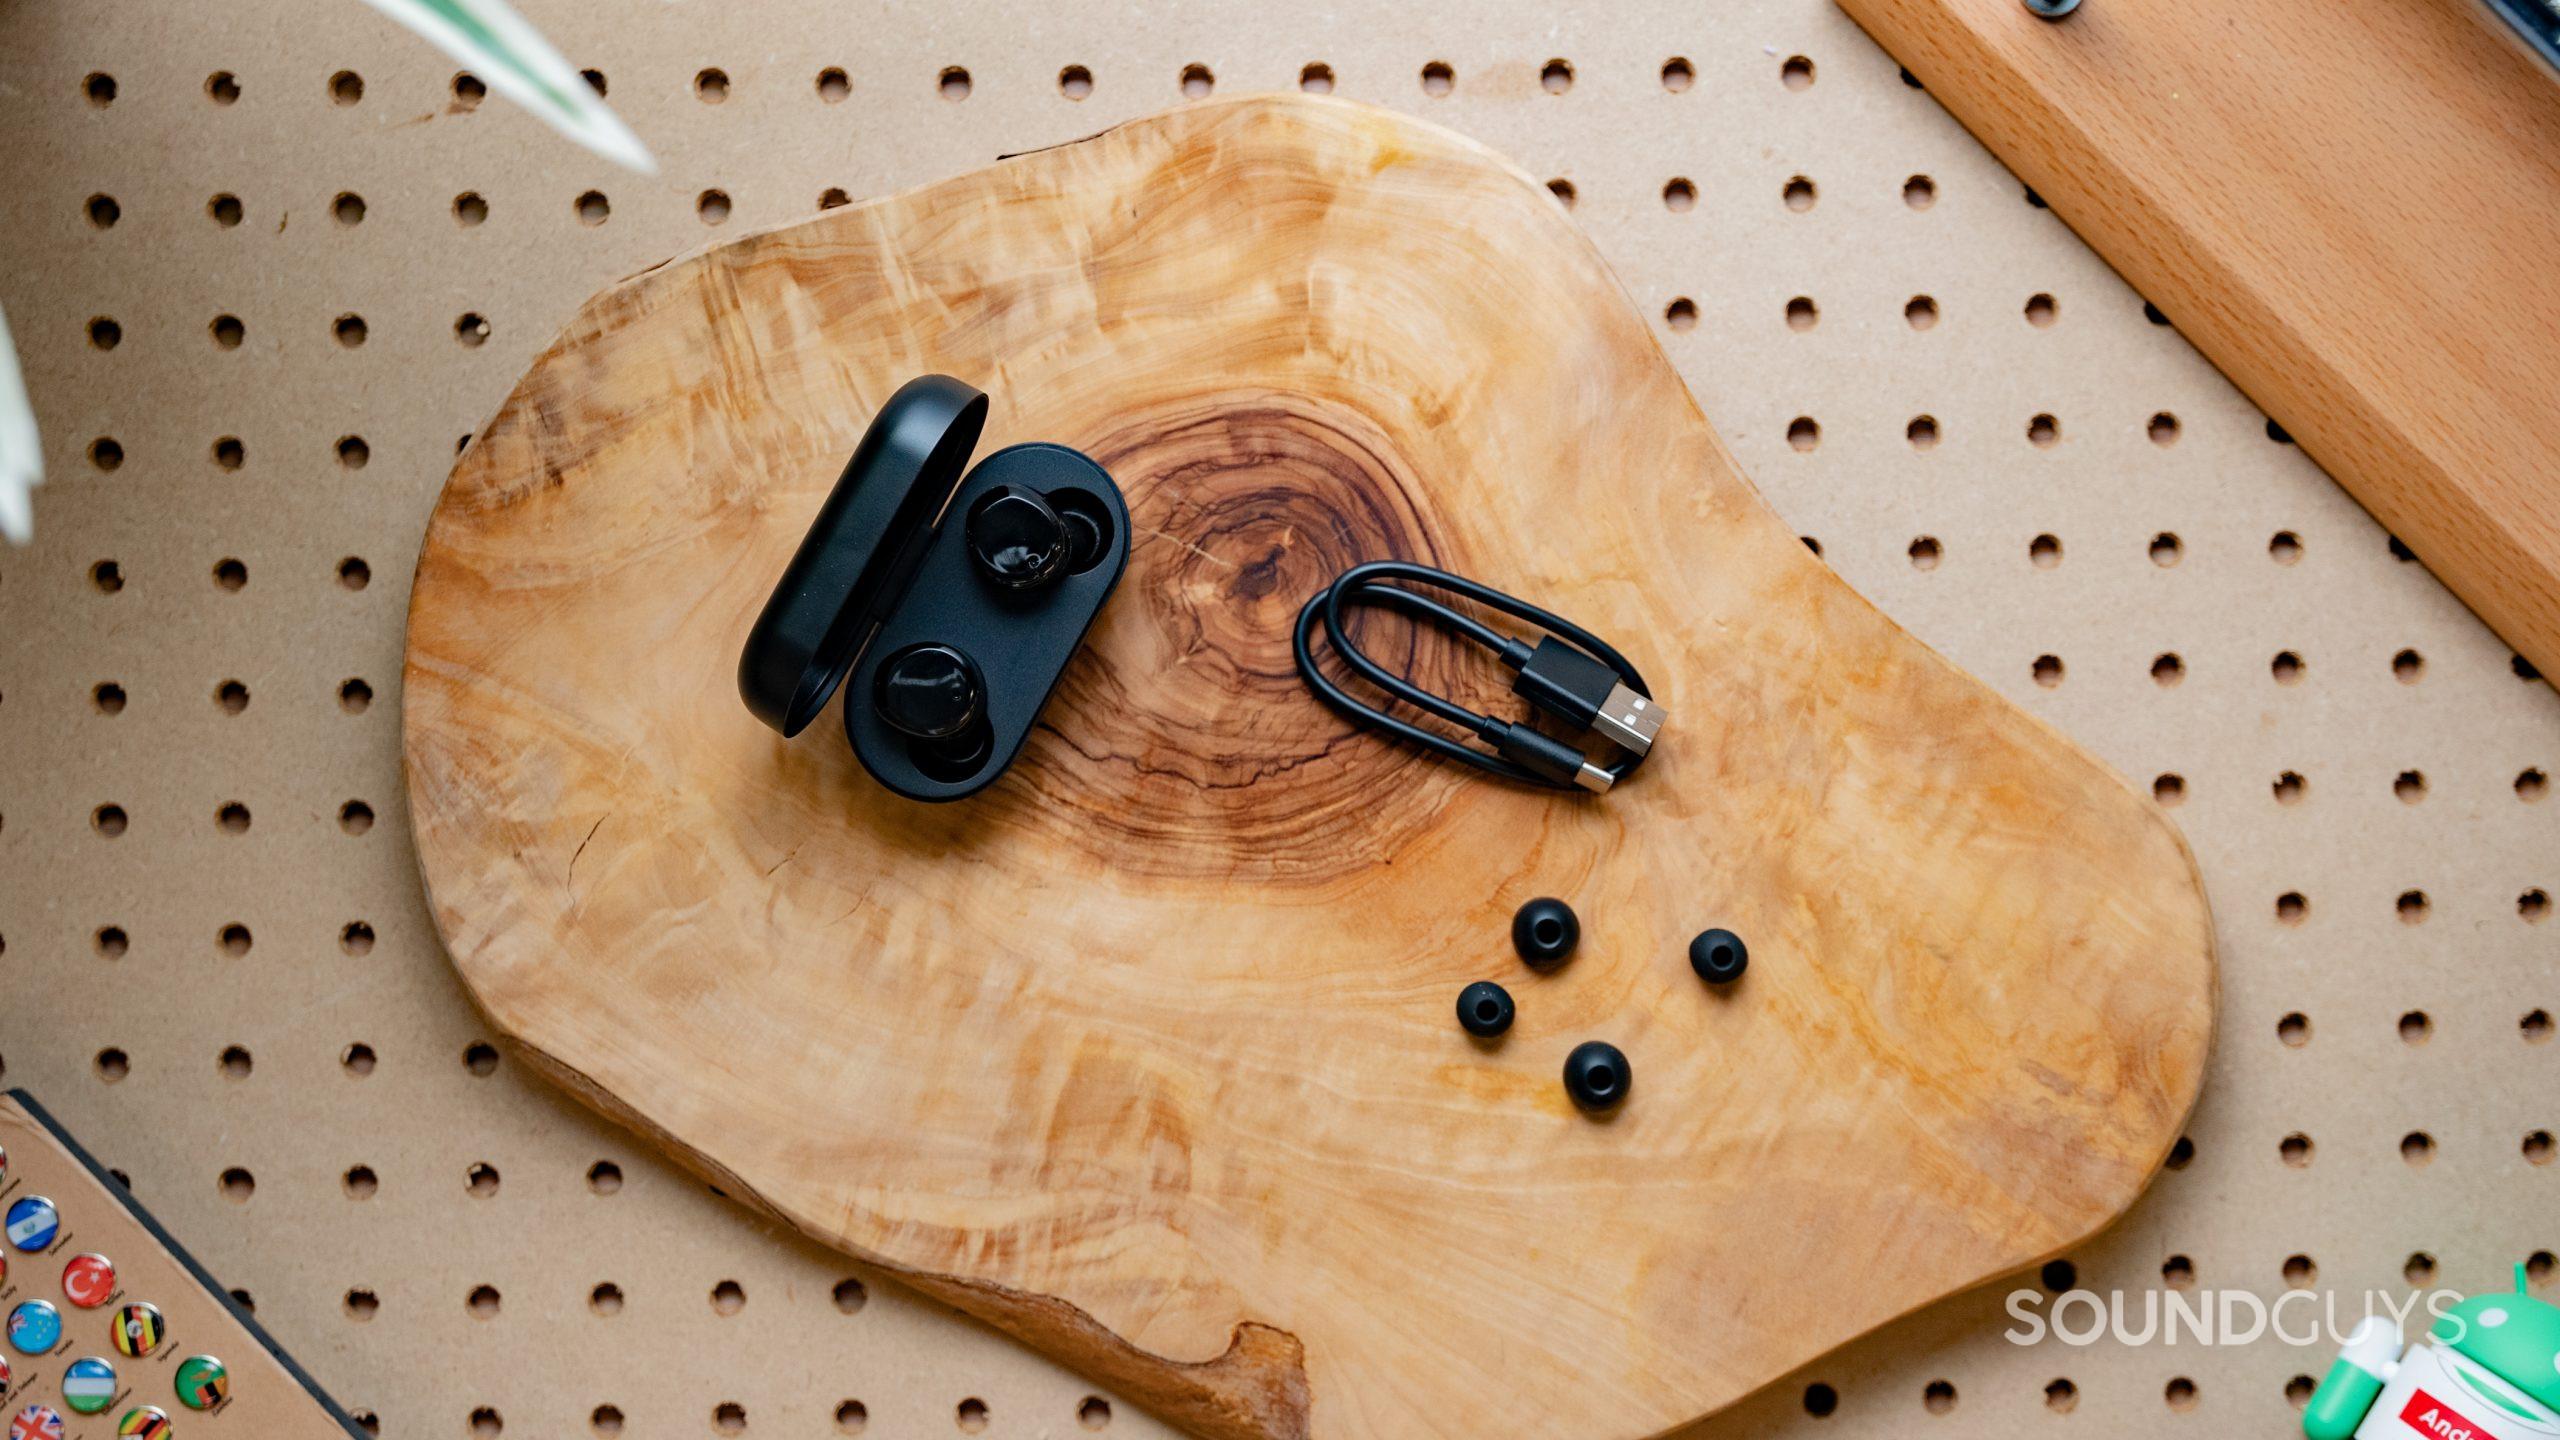 TOZO T12 earbuds on table next to extra ear tips and the USB C charging cable